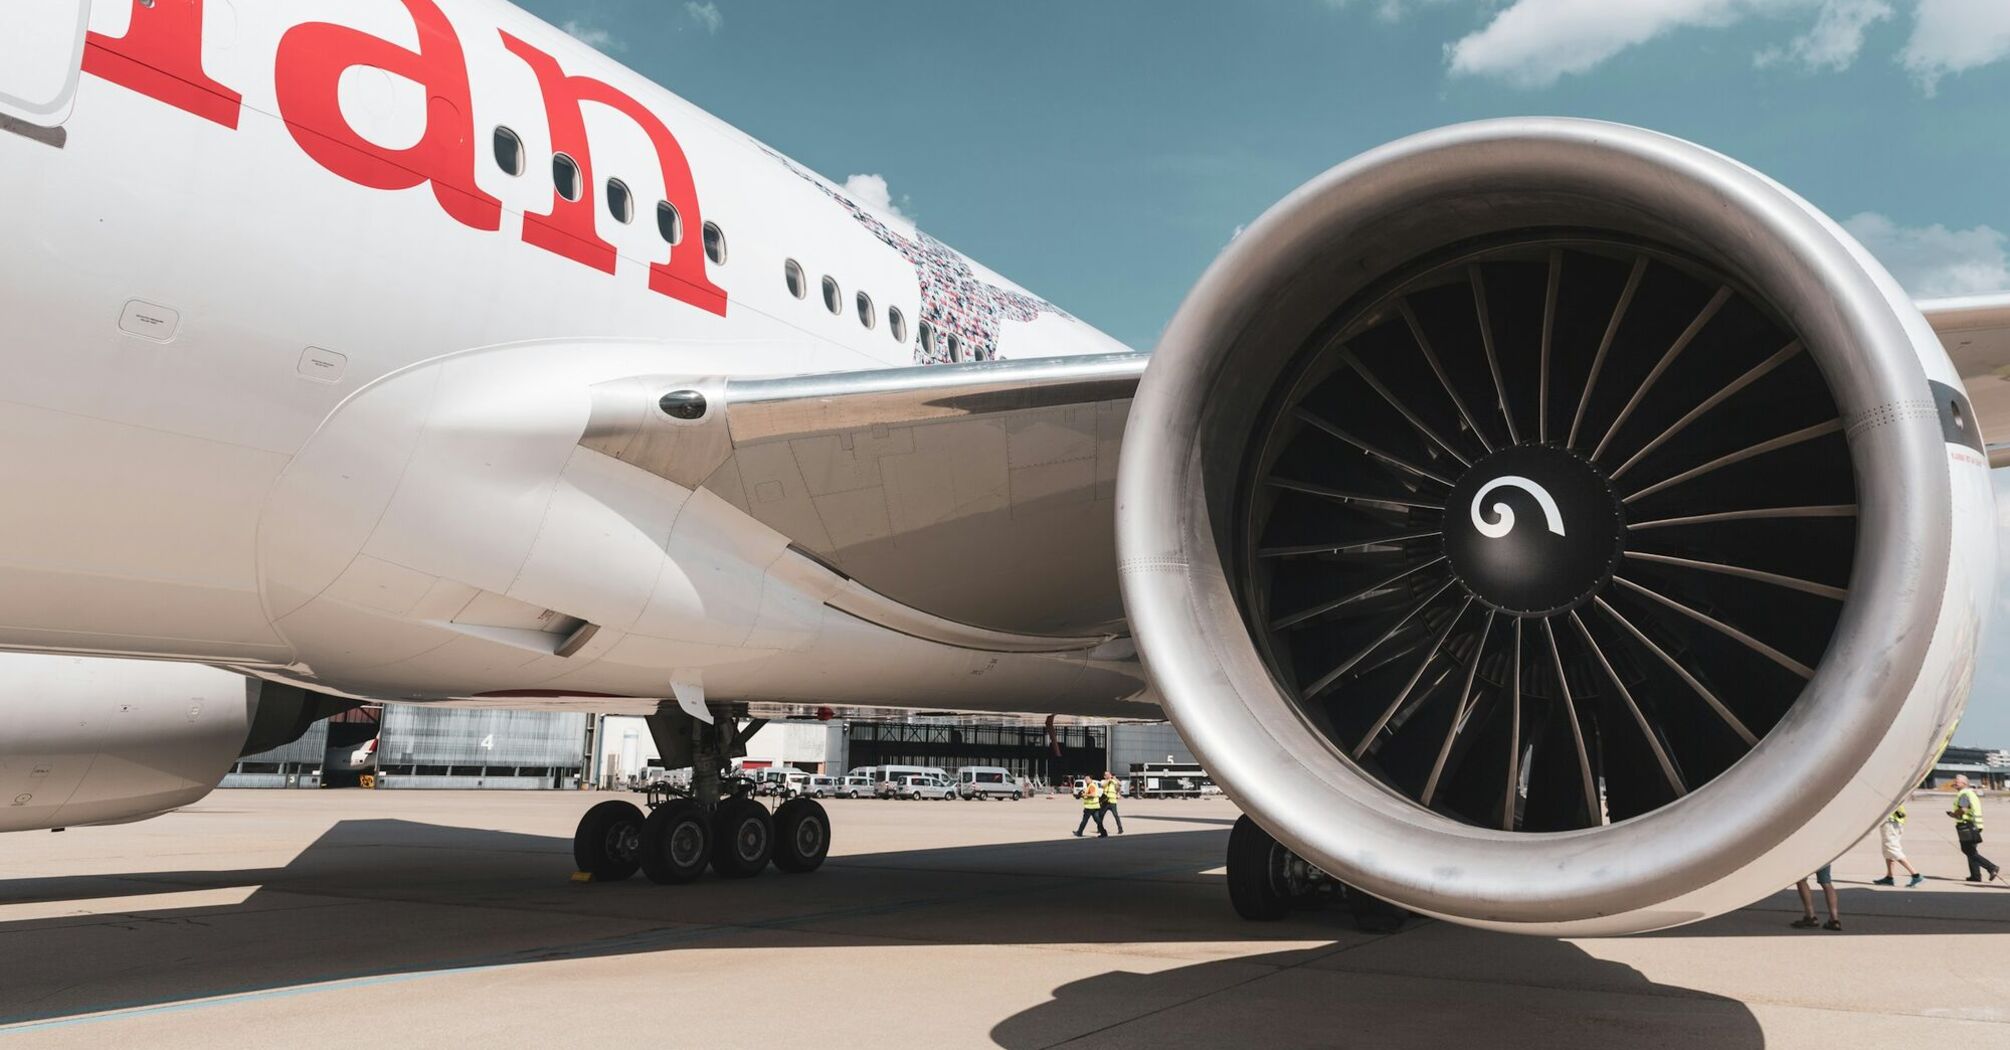 Close-up of Austrian Airlines Dreamliner engine on the tarmac